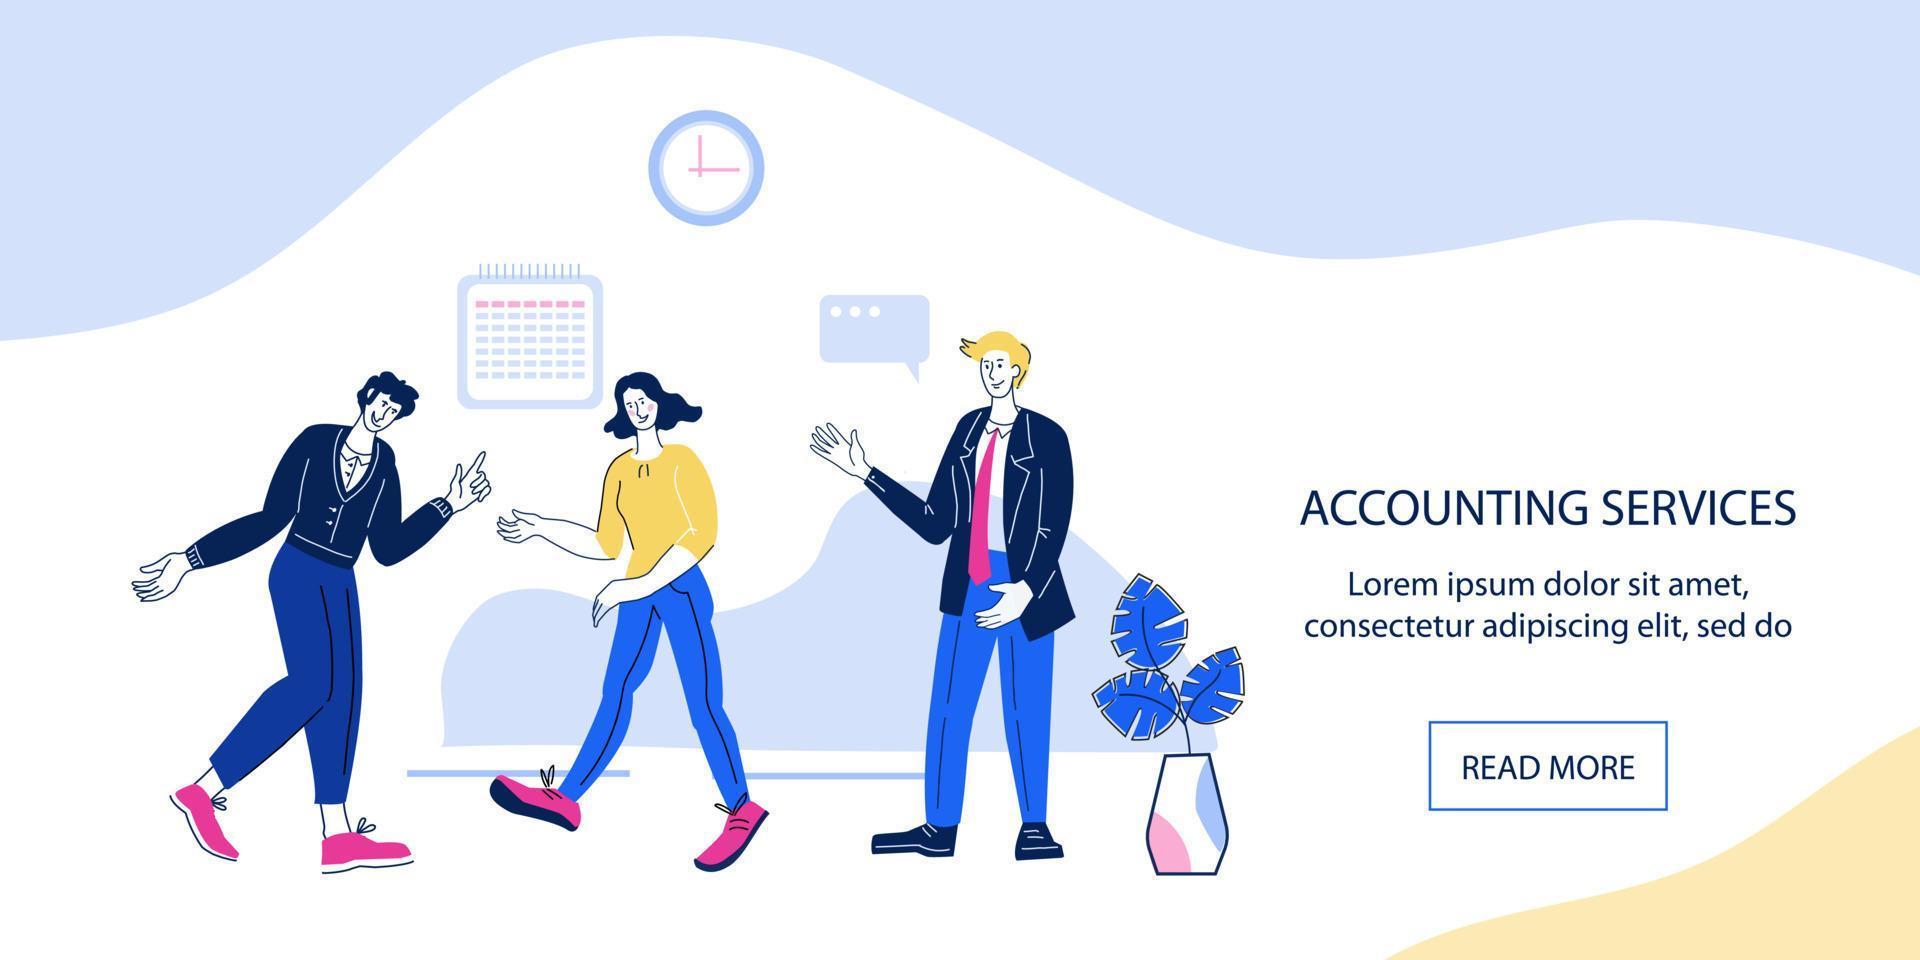 Company accounting and planning corporate business services banner. Business people characters offering financial analytics and accountancy, marketing research, flat vector illustration.